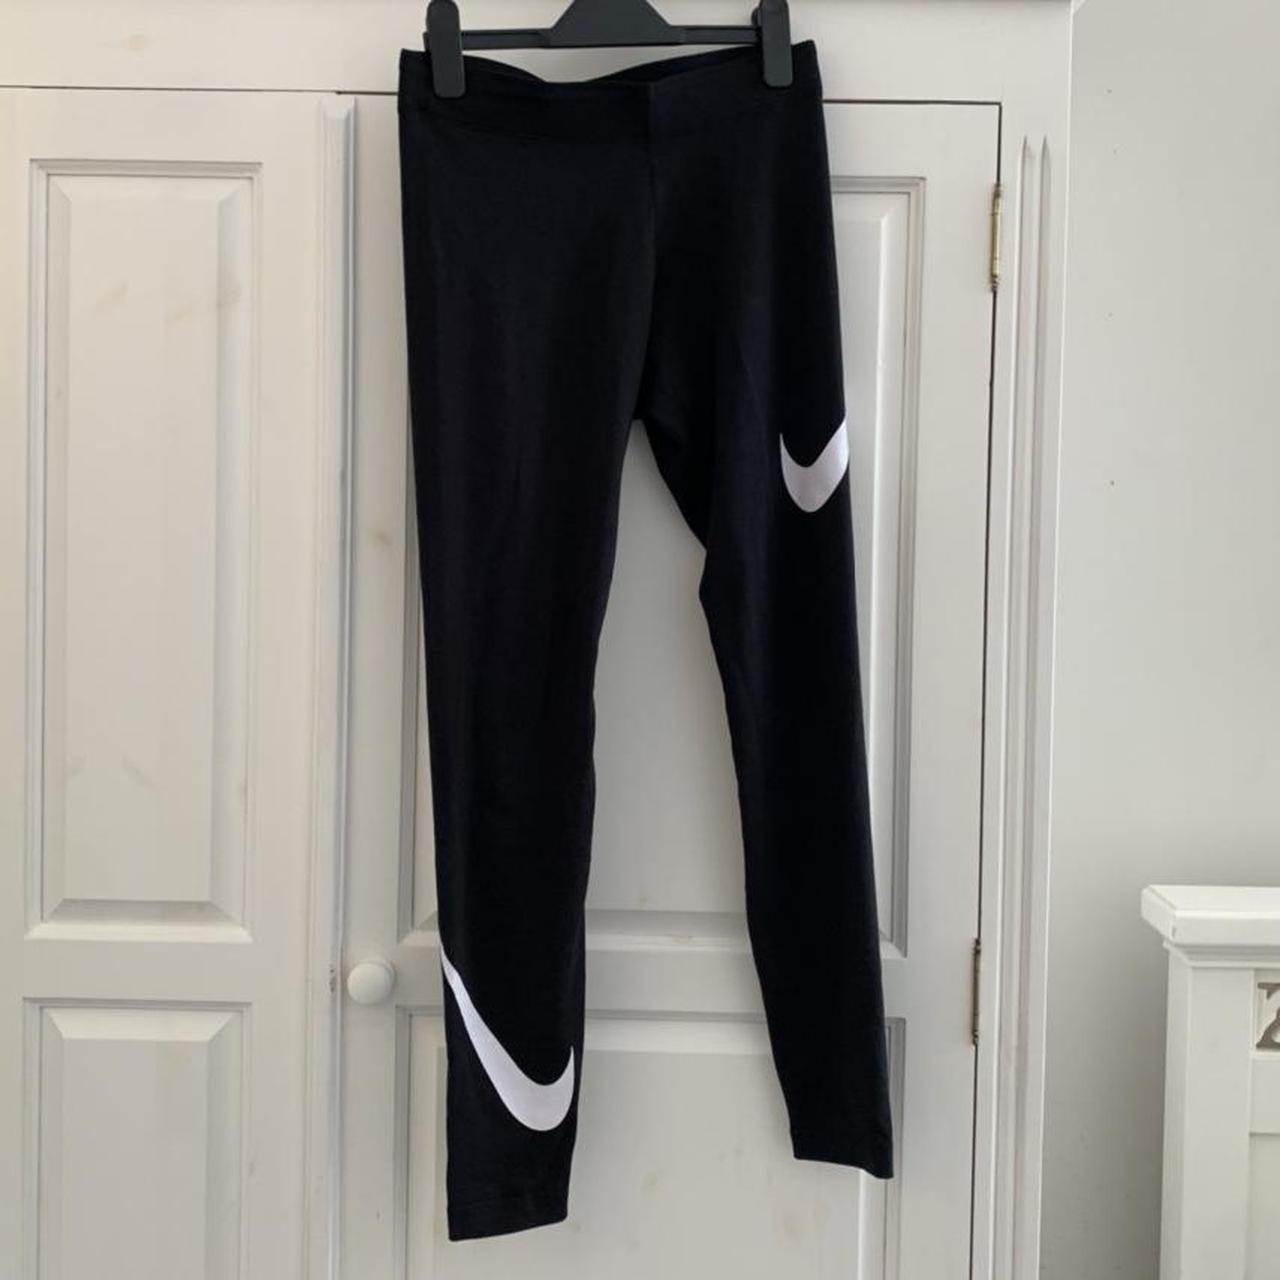 Nike leggings size small Love these just don't fit - Depop